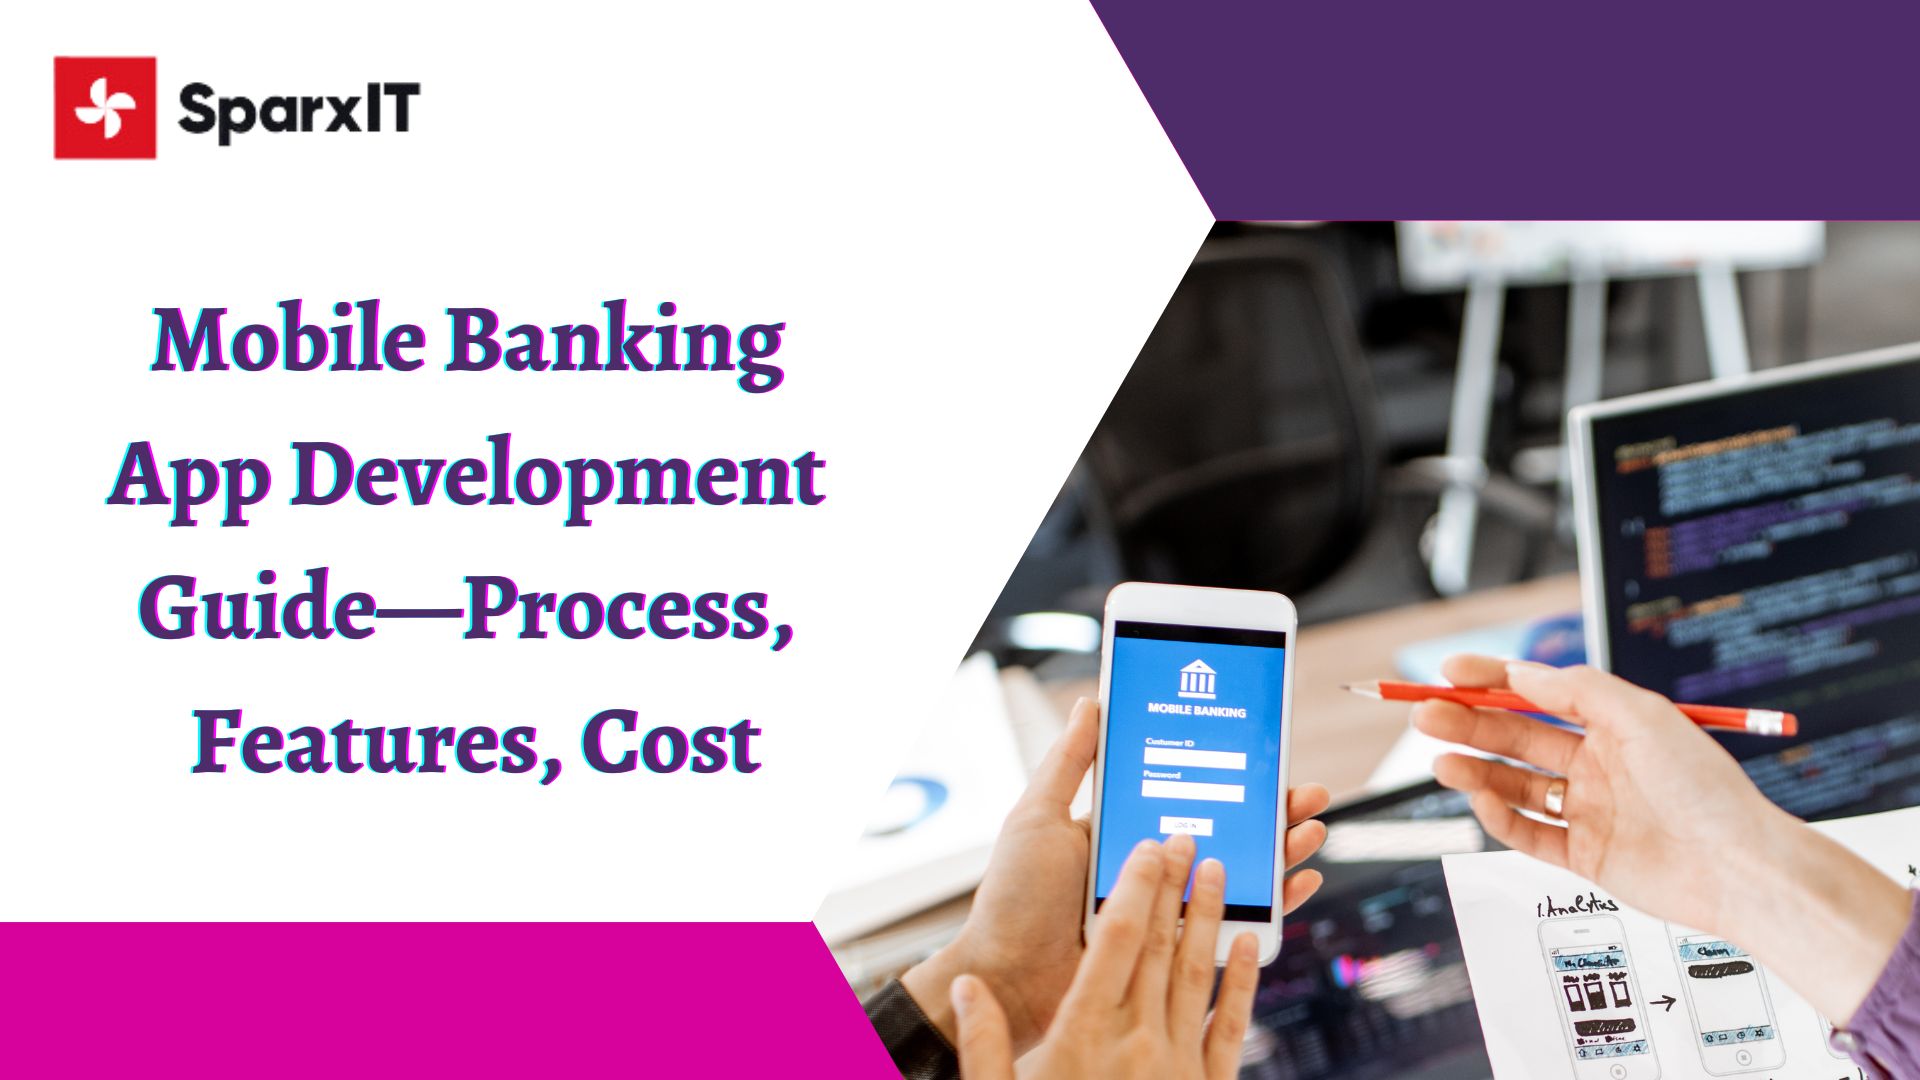 Mobile Banking App Development Guide—Process, Features, Cost